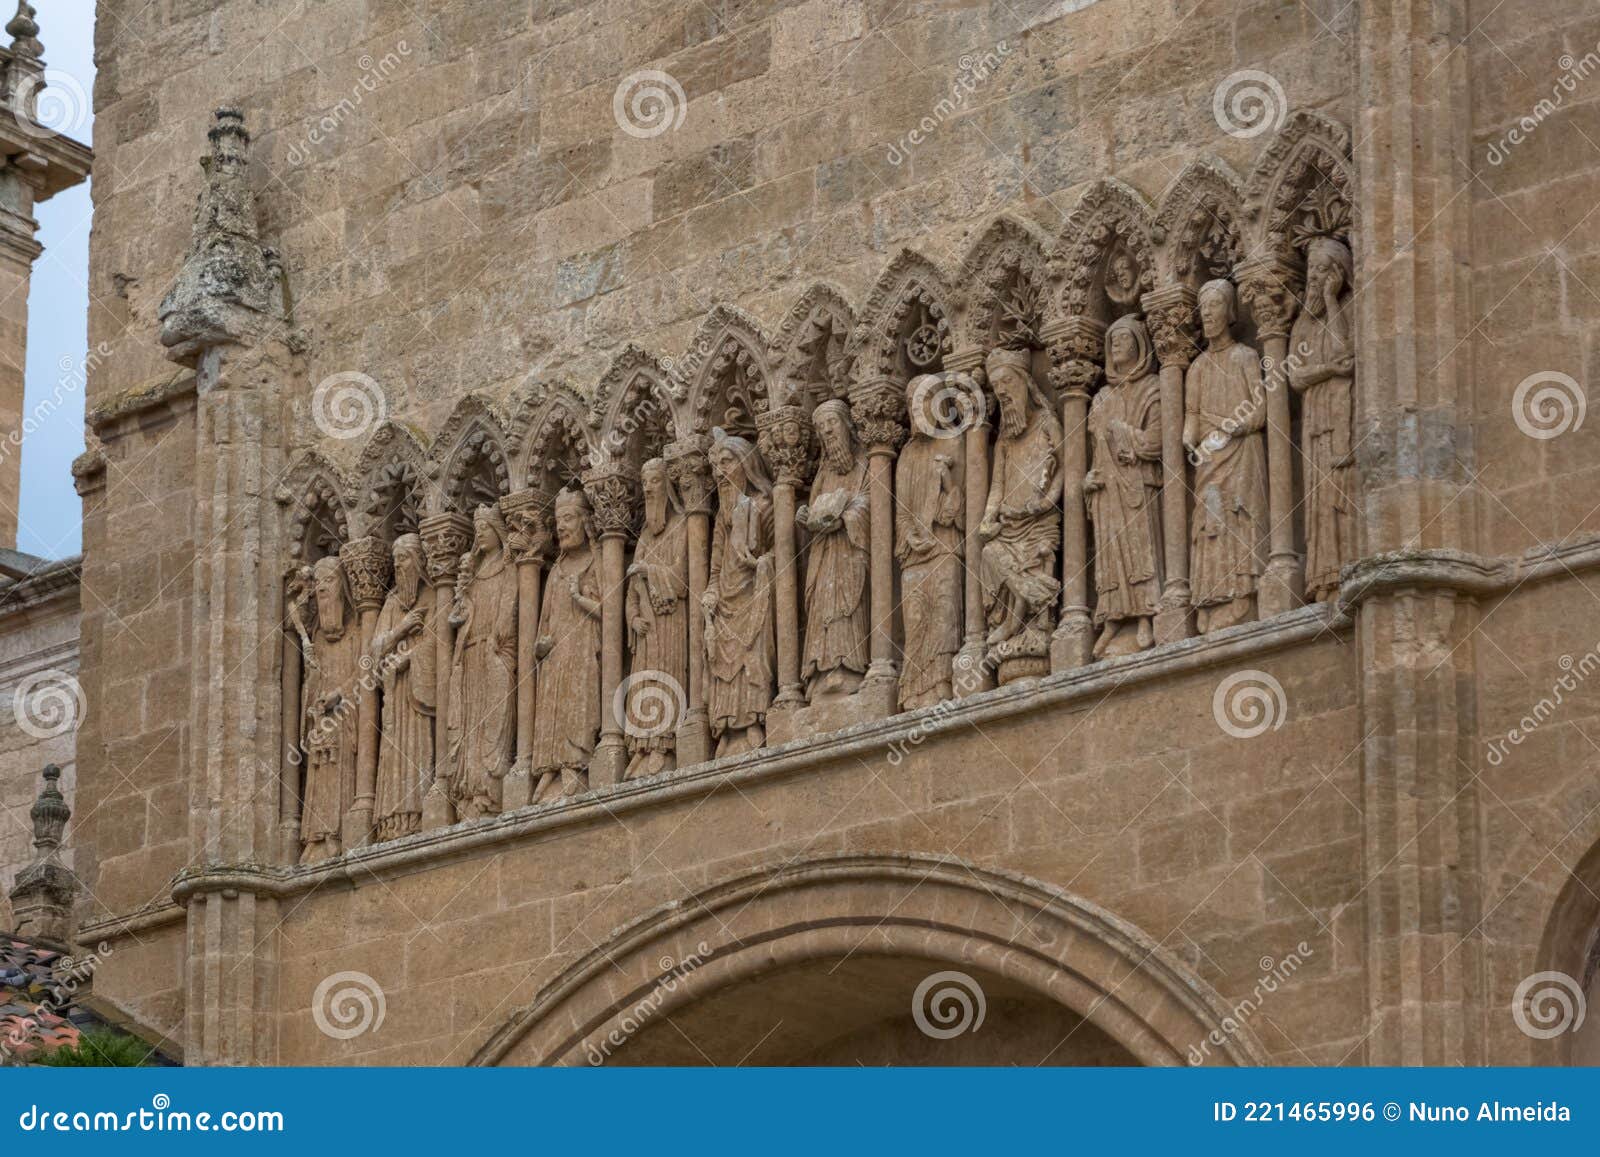 detailed view of a amazing romanesque sculpture on the chain gate, cuidad rodrigo cathedral facade, with old testament